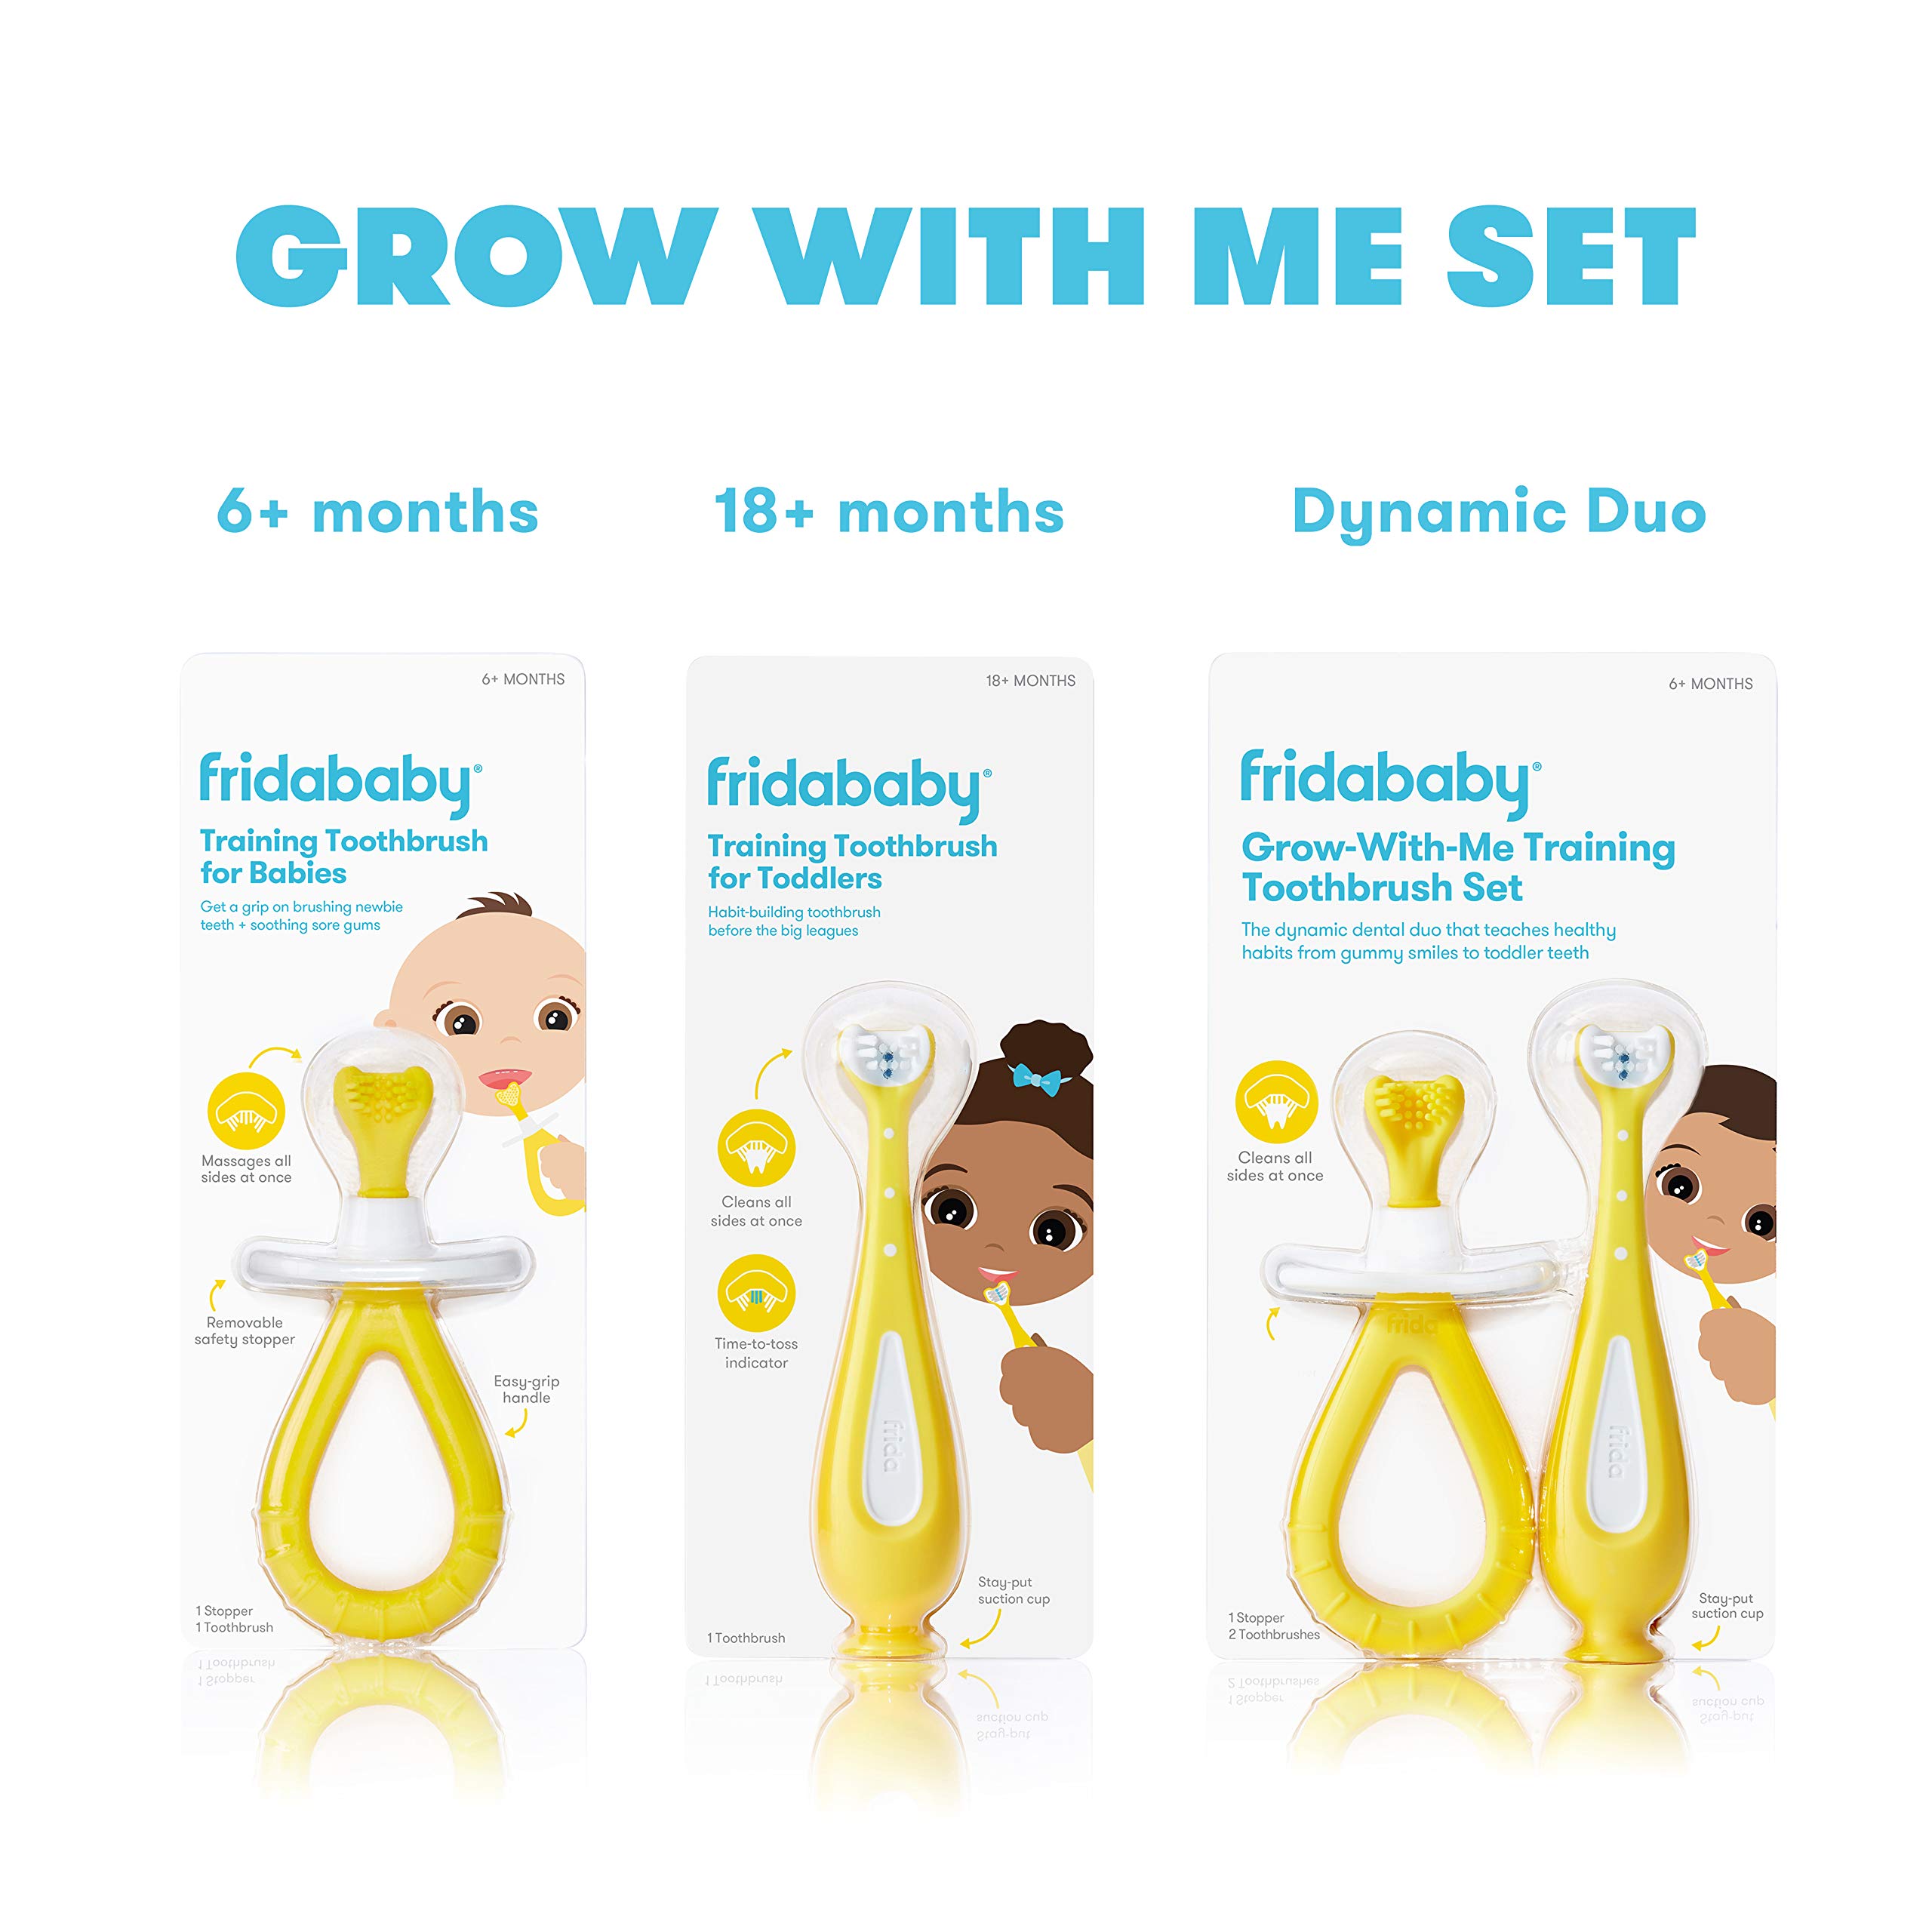 Frida Baby Grow-with-Me Training Toothbrush Set | Infant to Toddler Toothbrush Oral Care for Sensitive Gums